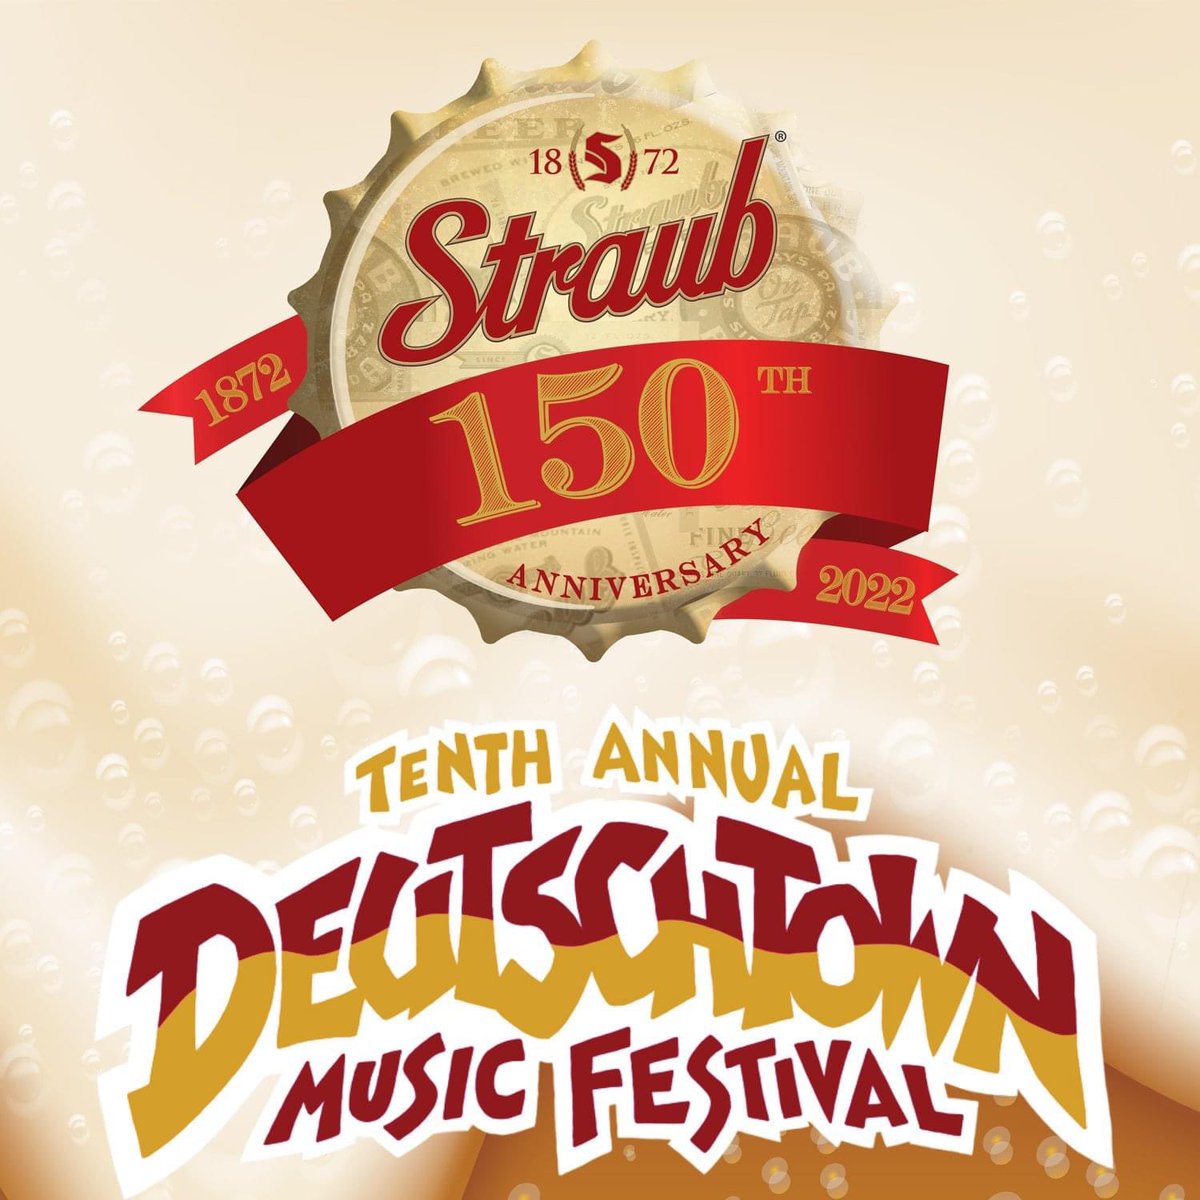 Ready to start serving up your favorite Straub Beers at the 10th Annual Deutschtown Music Festival! Starts today in Pittsburgh's North Shore! It's gonna be a blast! Check out deutschtownmusicfestival.com for maps, venues and performance schedules.